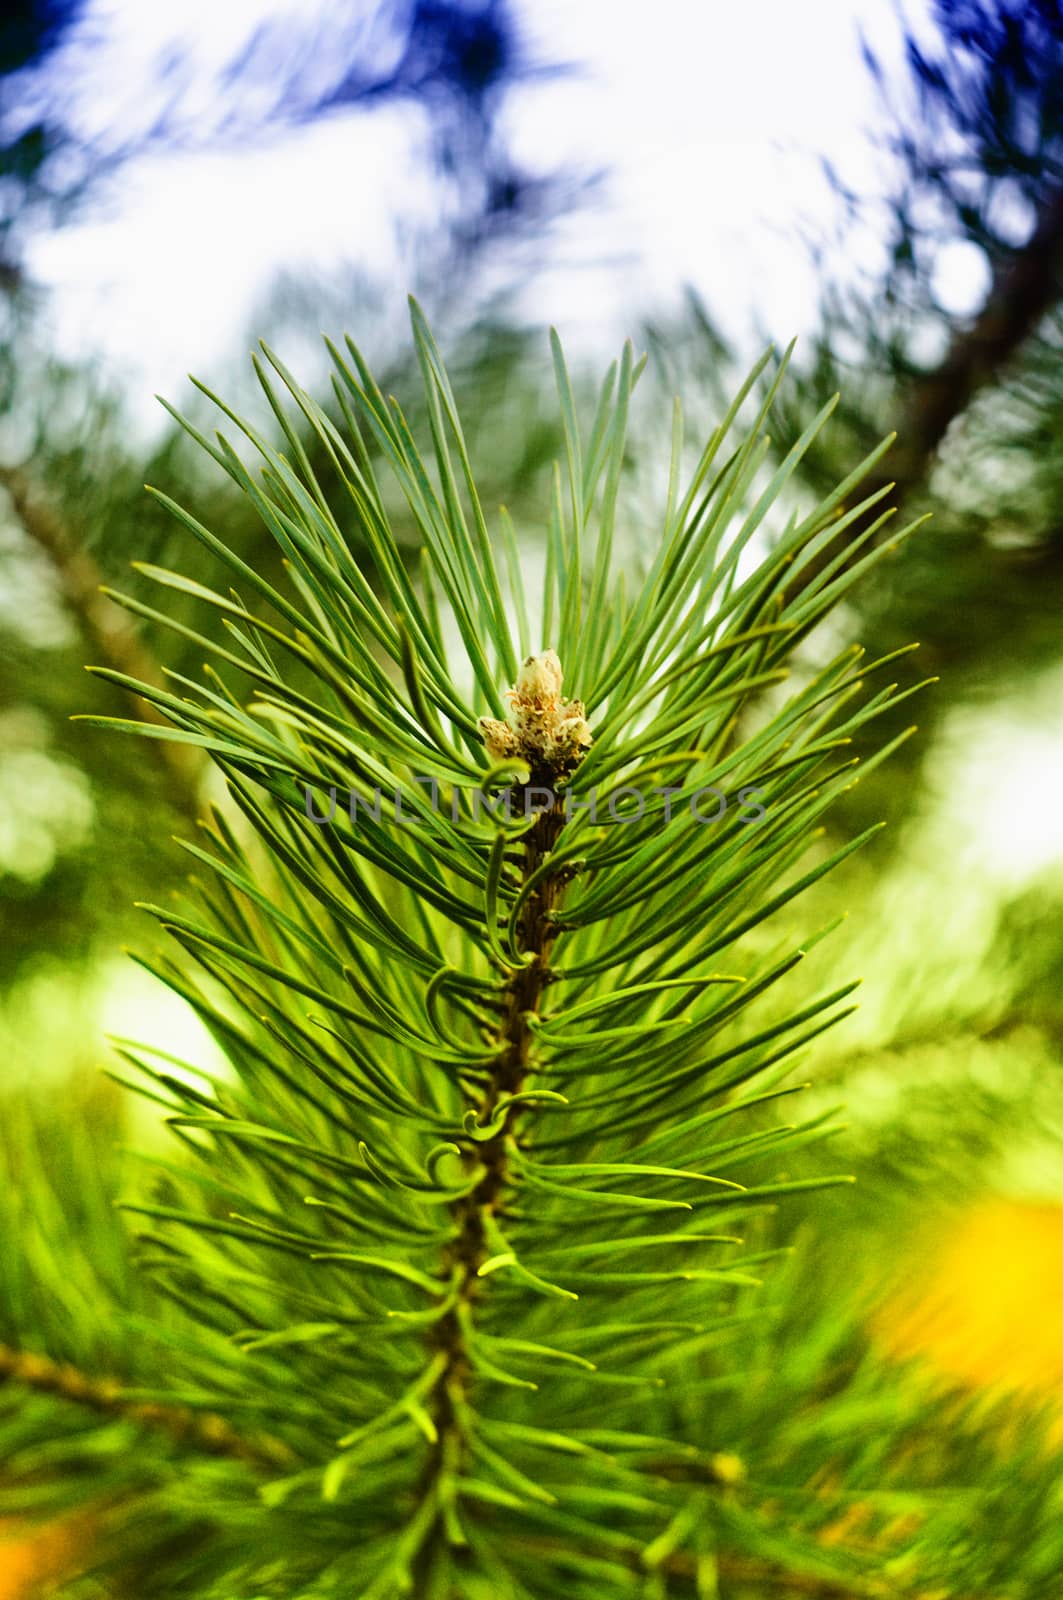 Colorful fresh green young pine branch close-up by Eagle2308